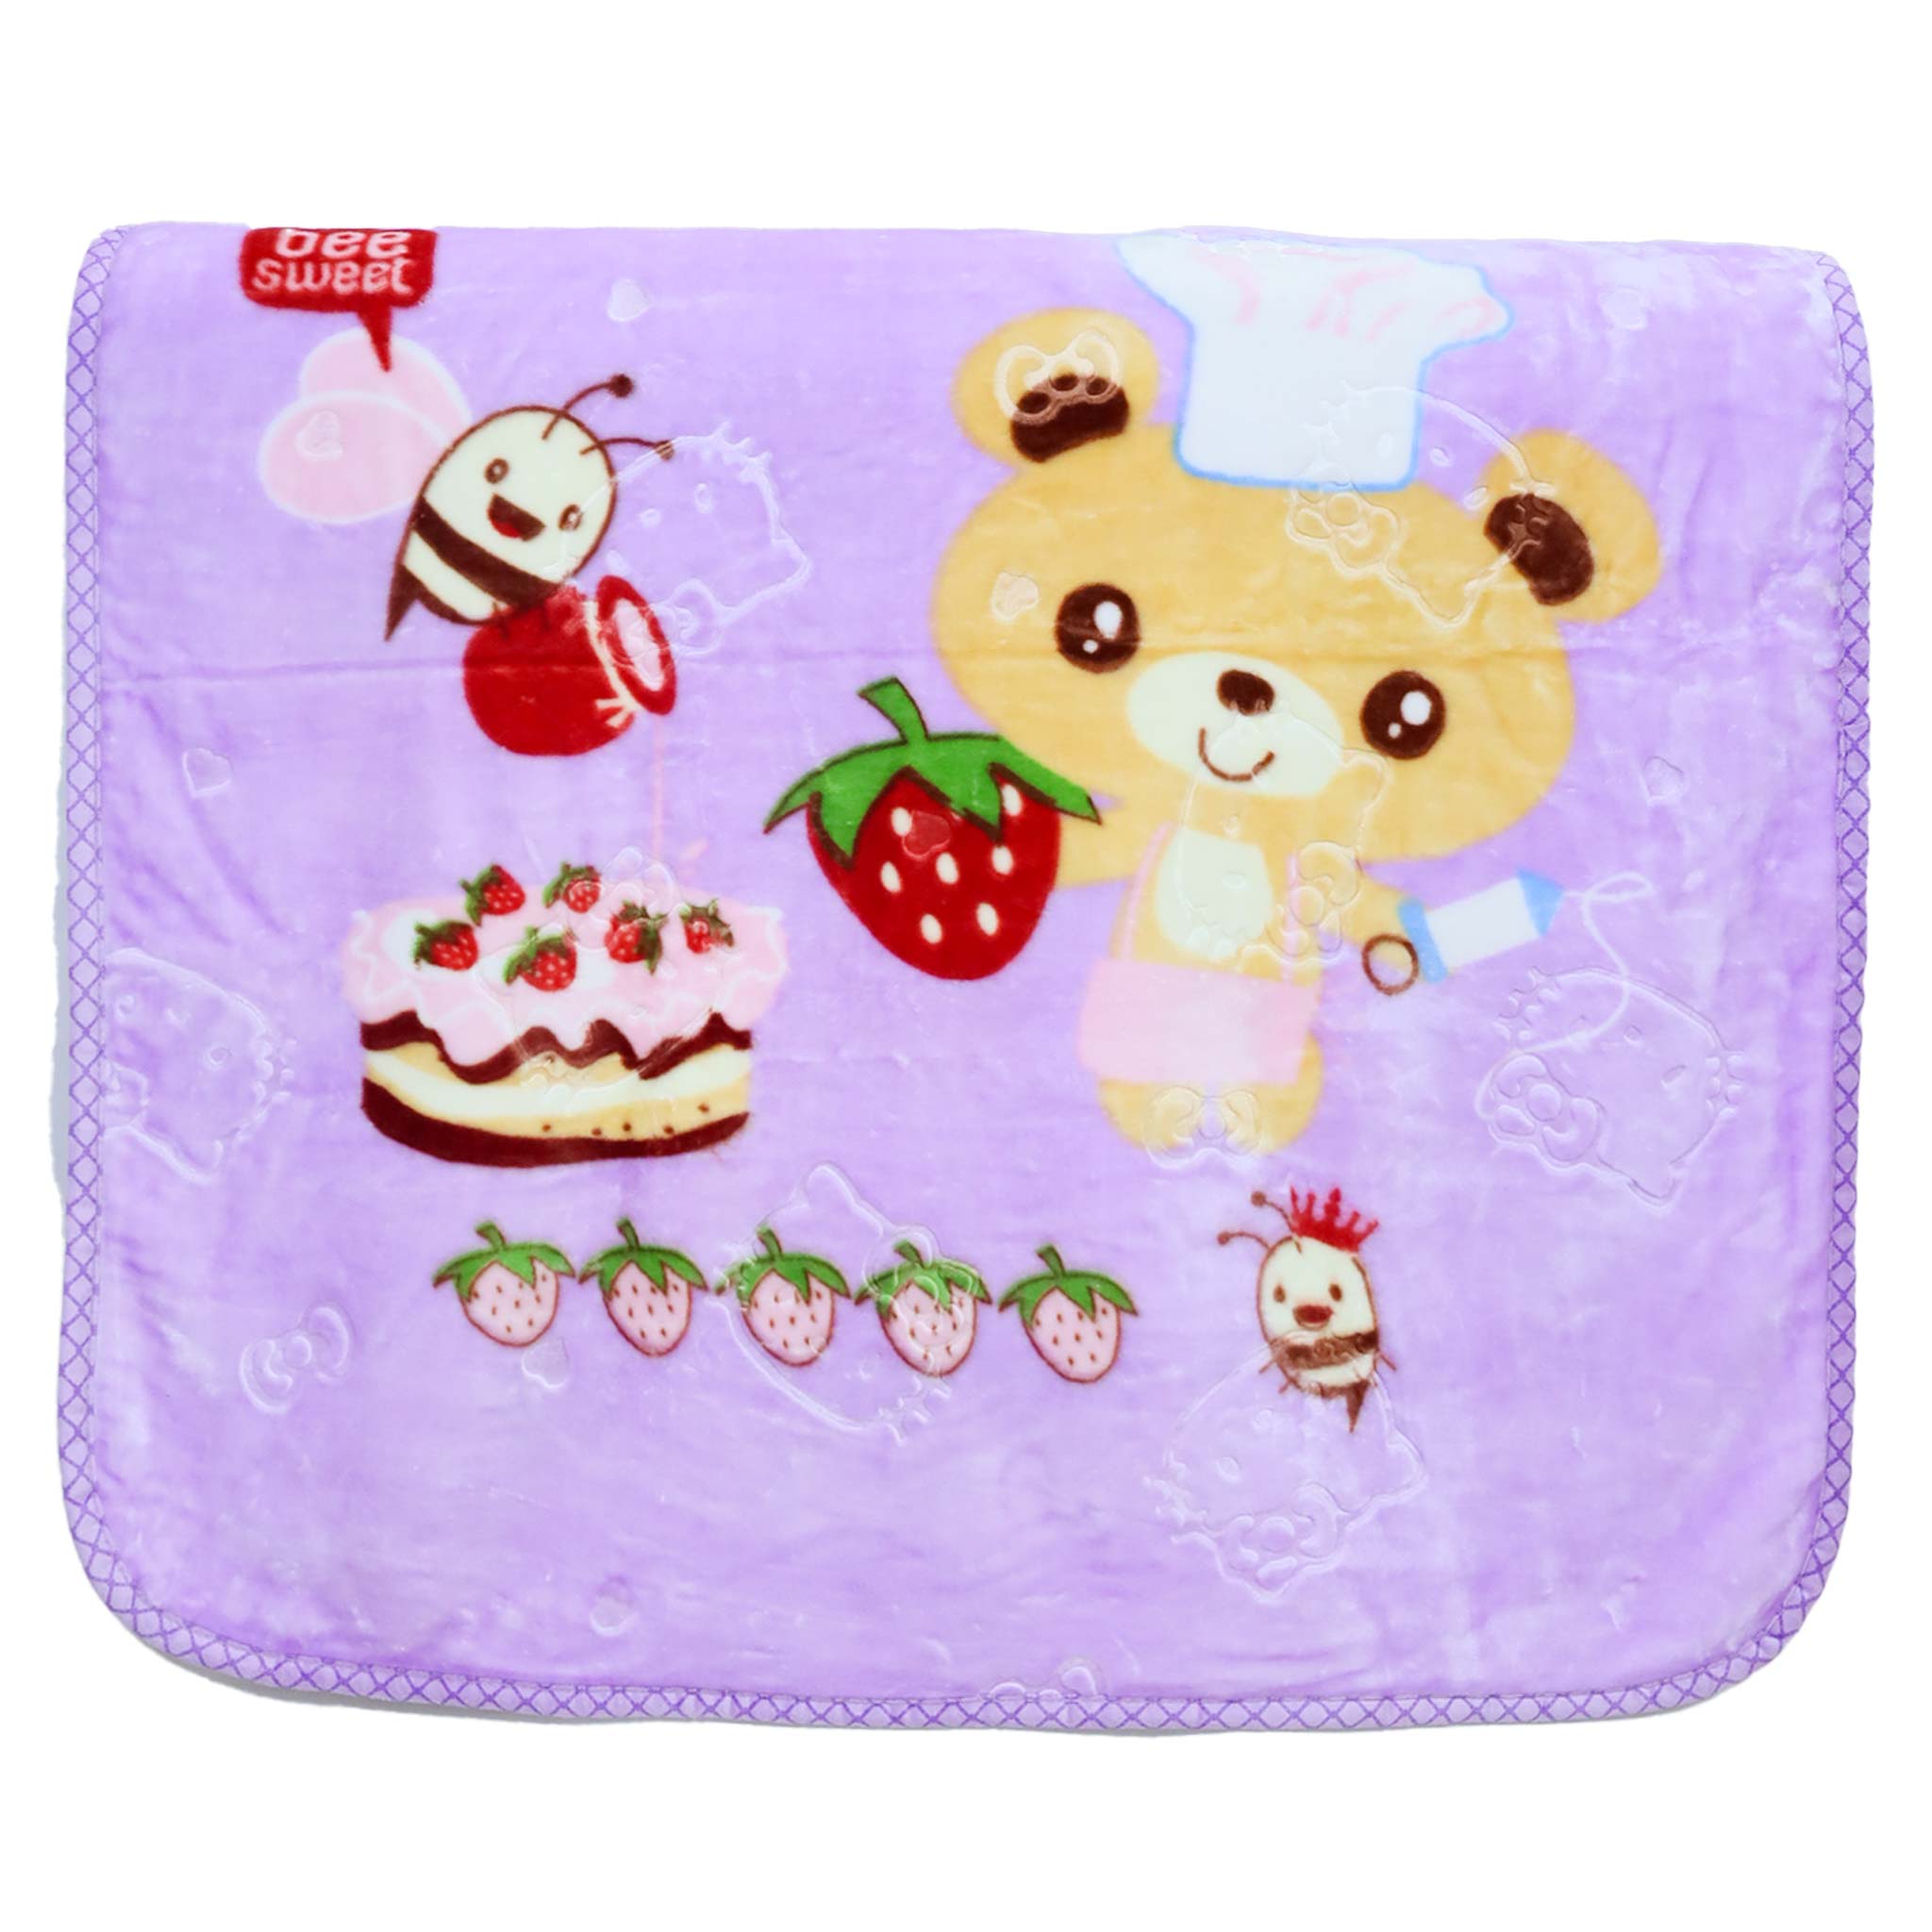 Baby Blanket Bear Character Purple Color